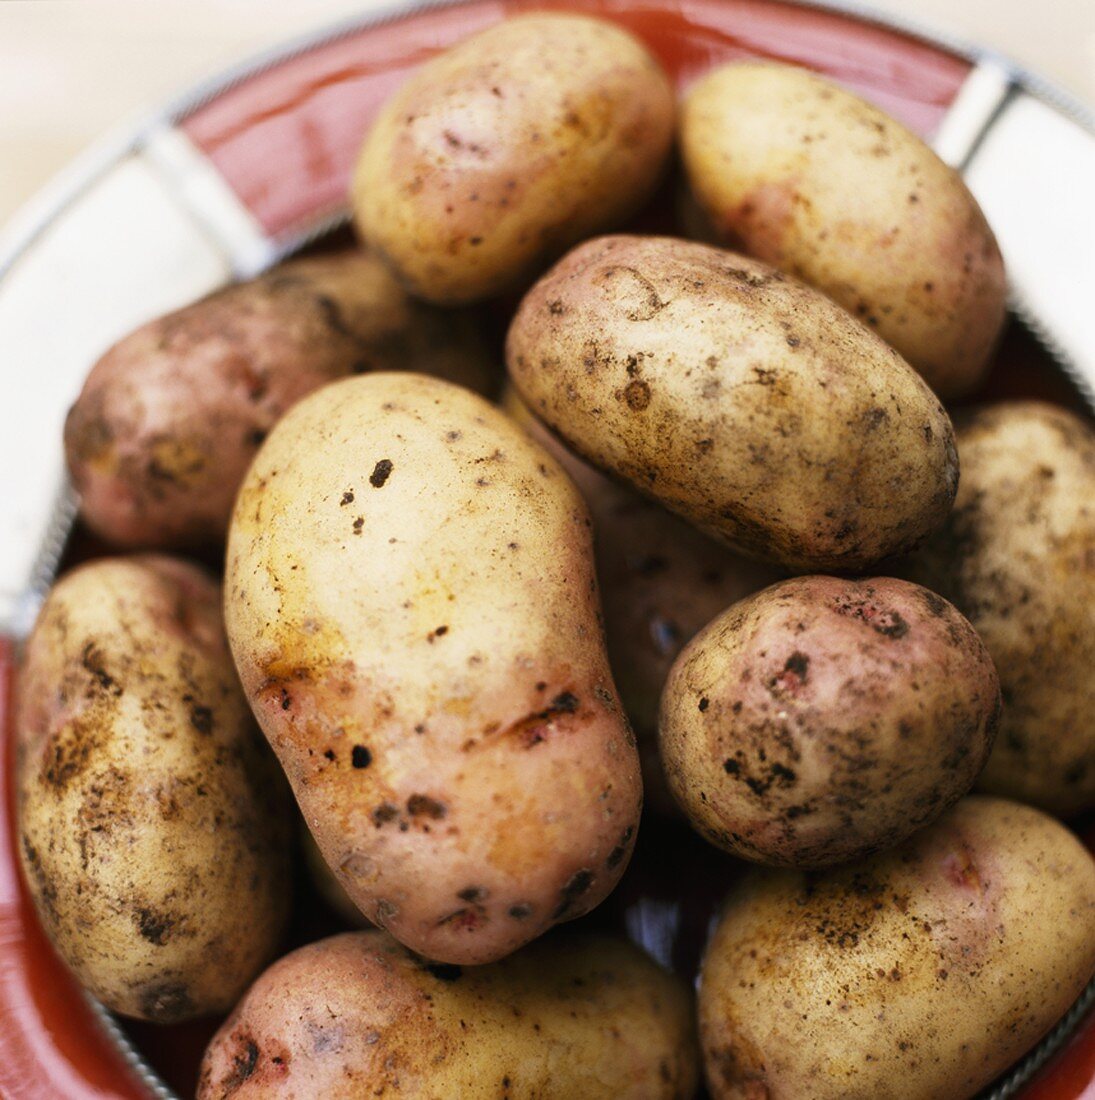 Fresh potatoes in a bowl (overhead view)